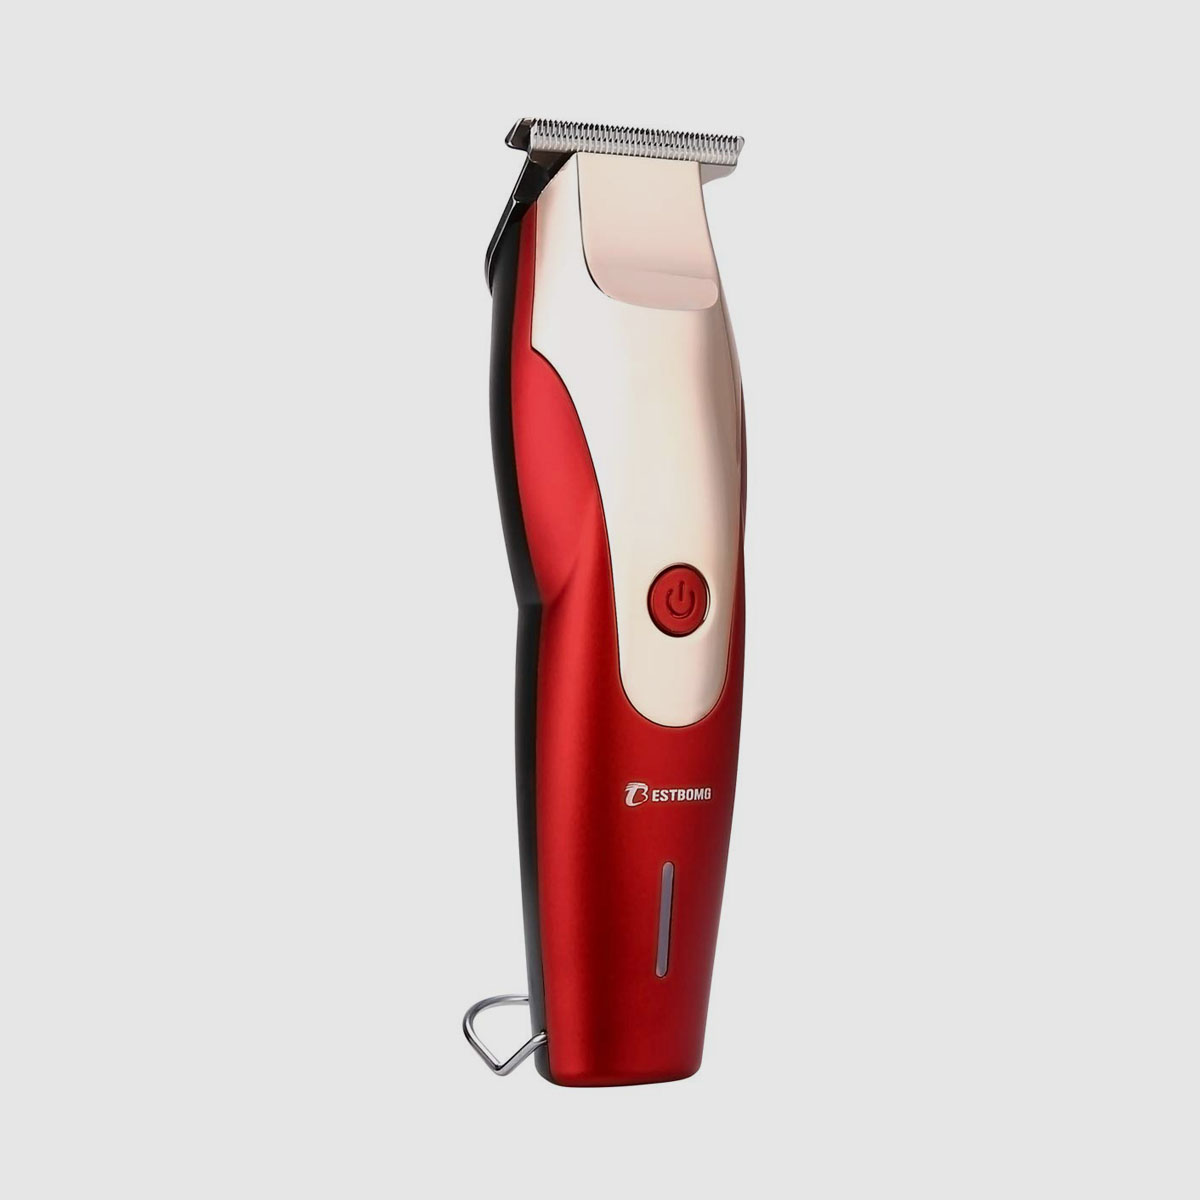 Pro T Outliner Mens Hair Clippers - 0 